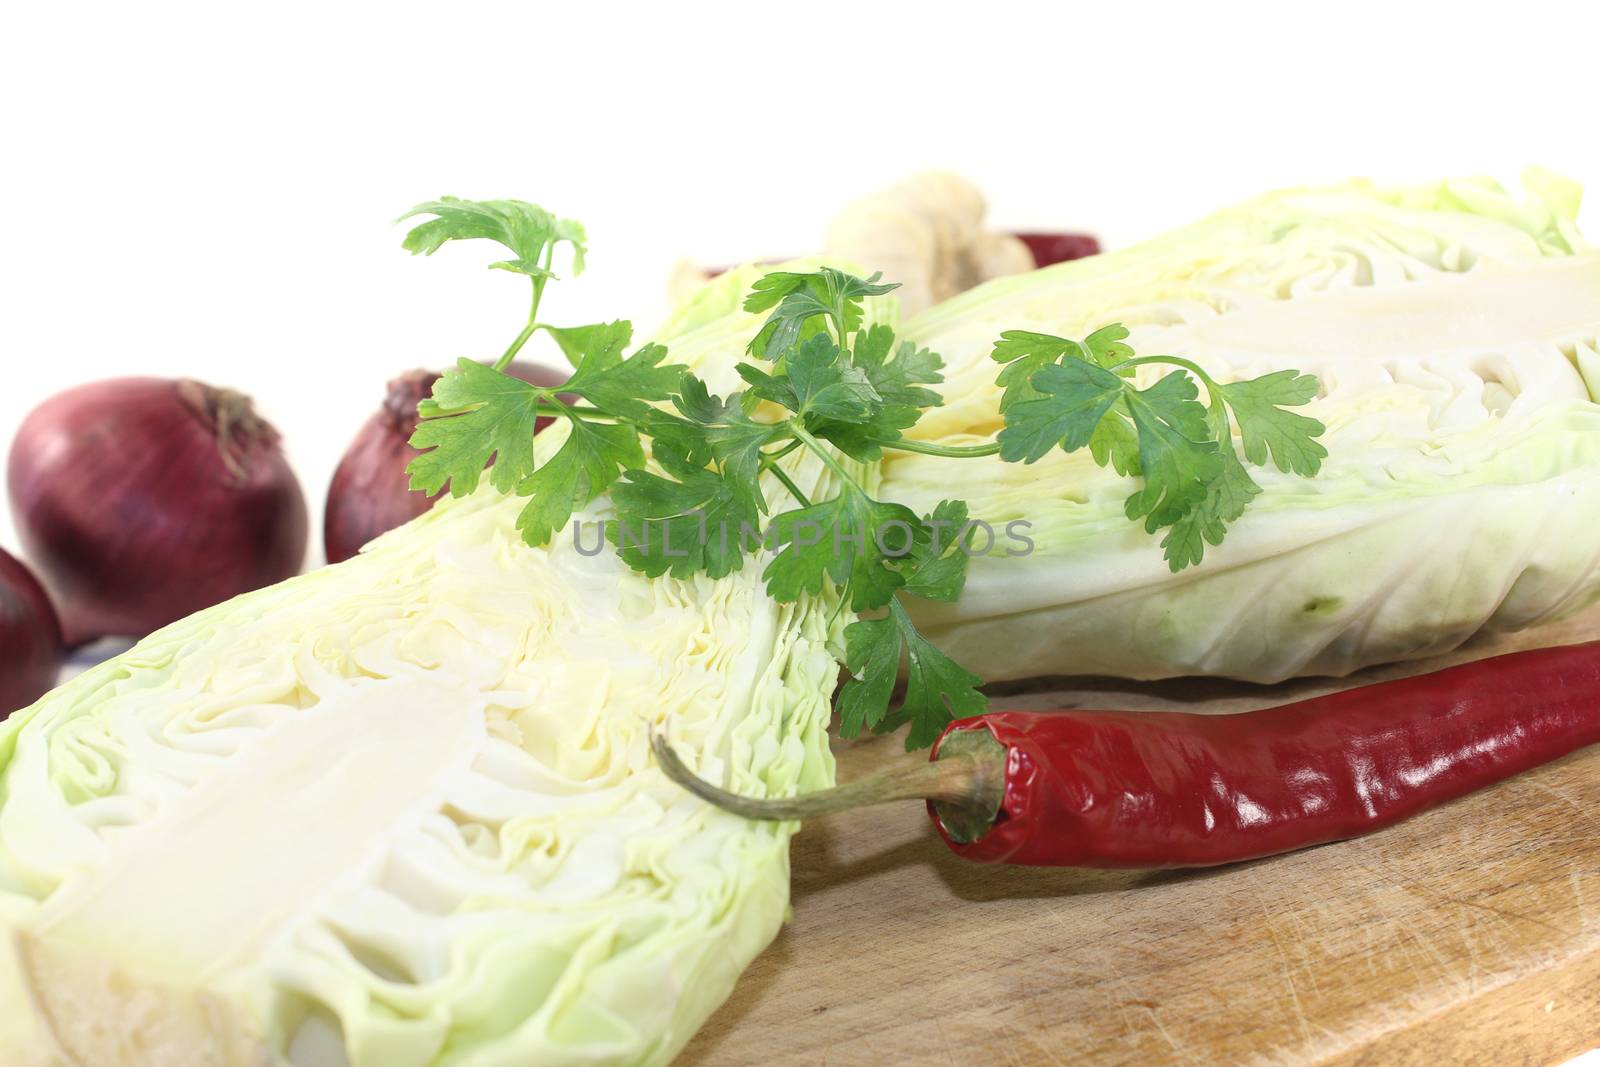 sweetheart Cabbage with hot peppers on a board by discovery